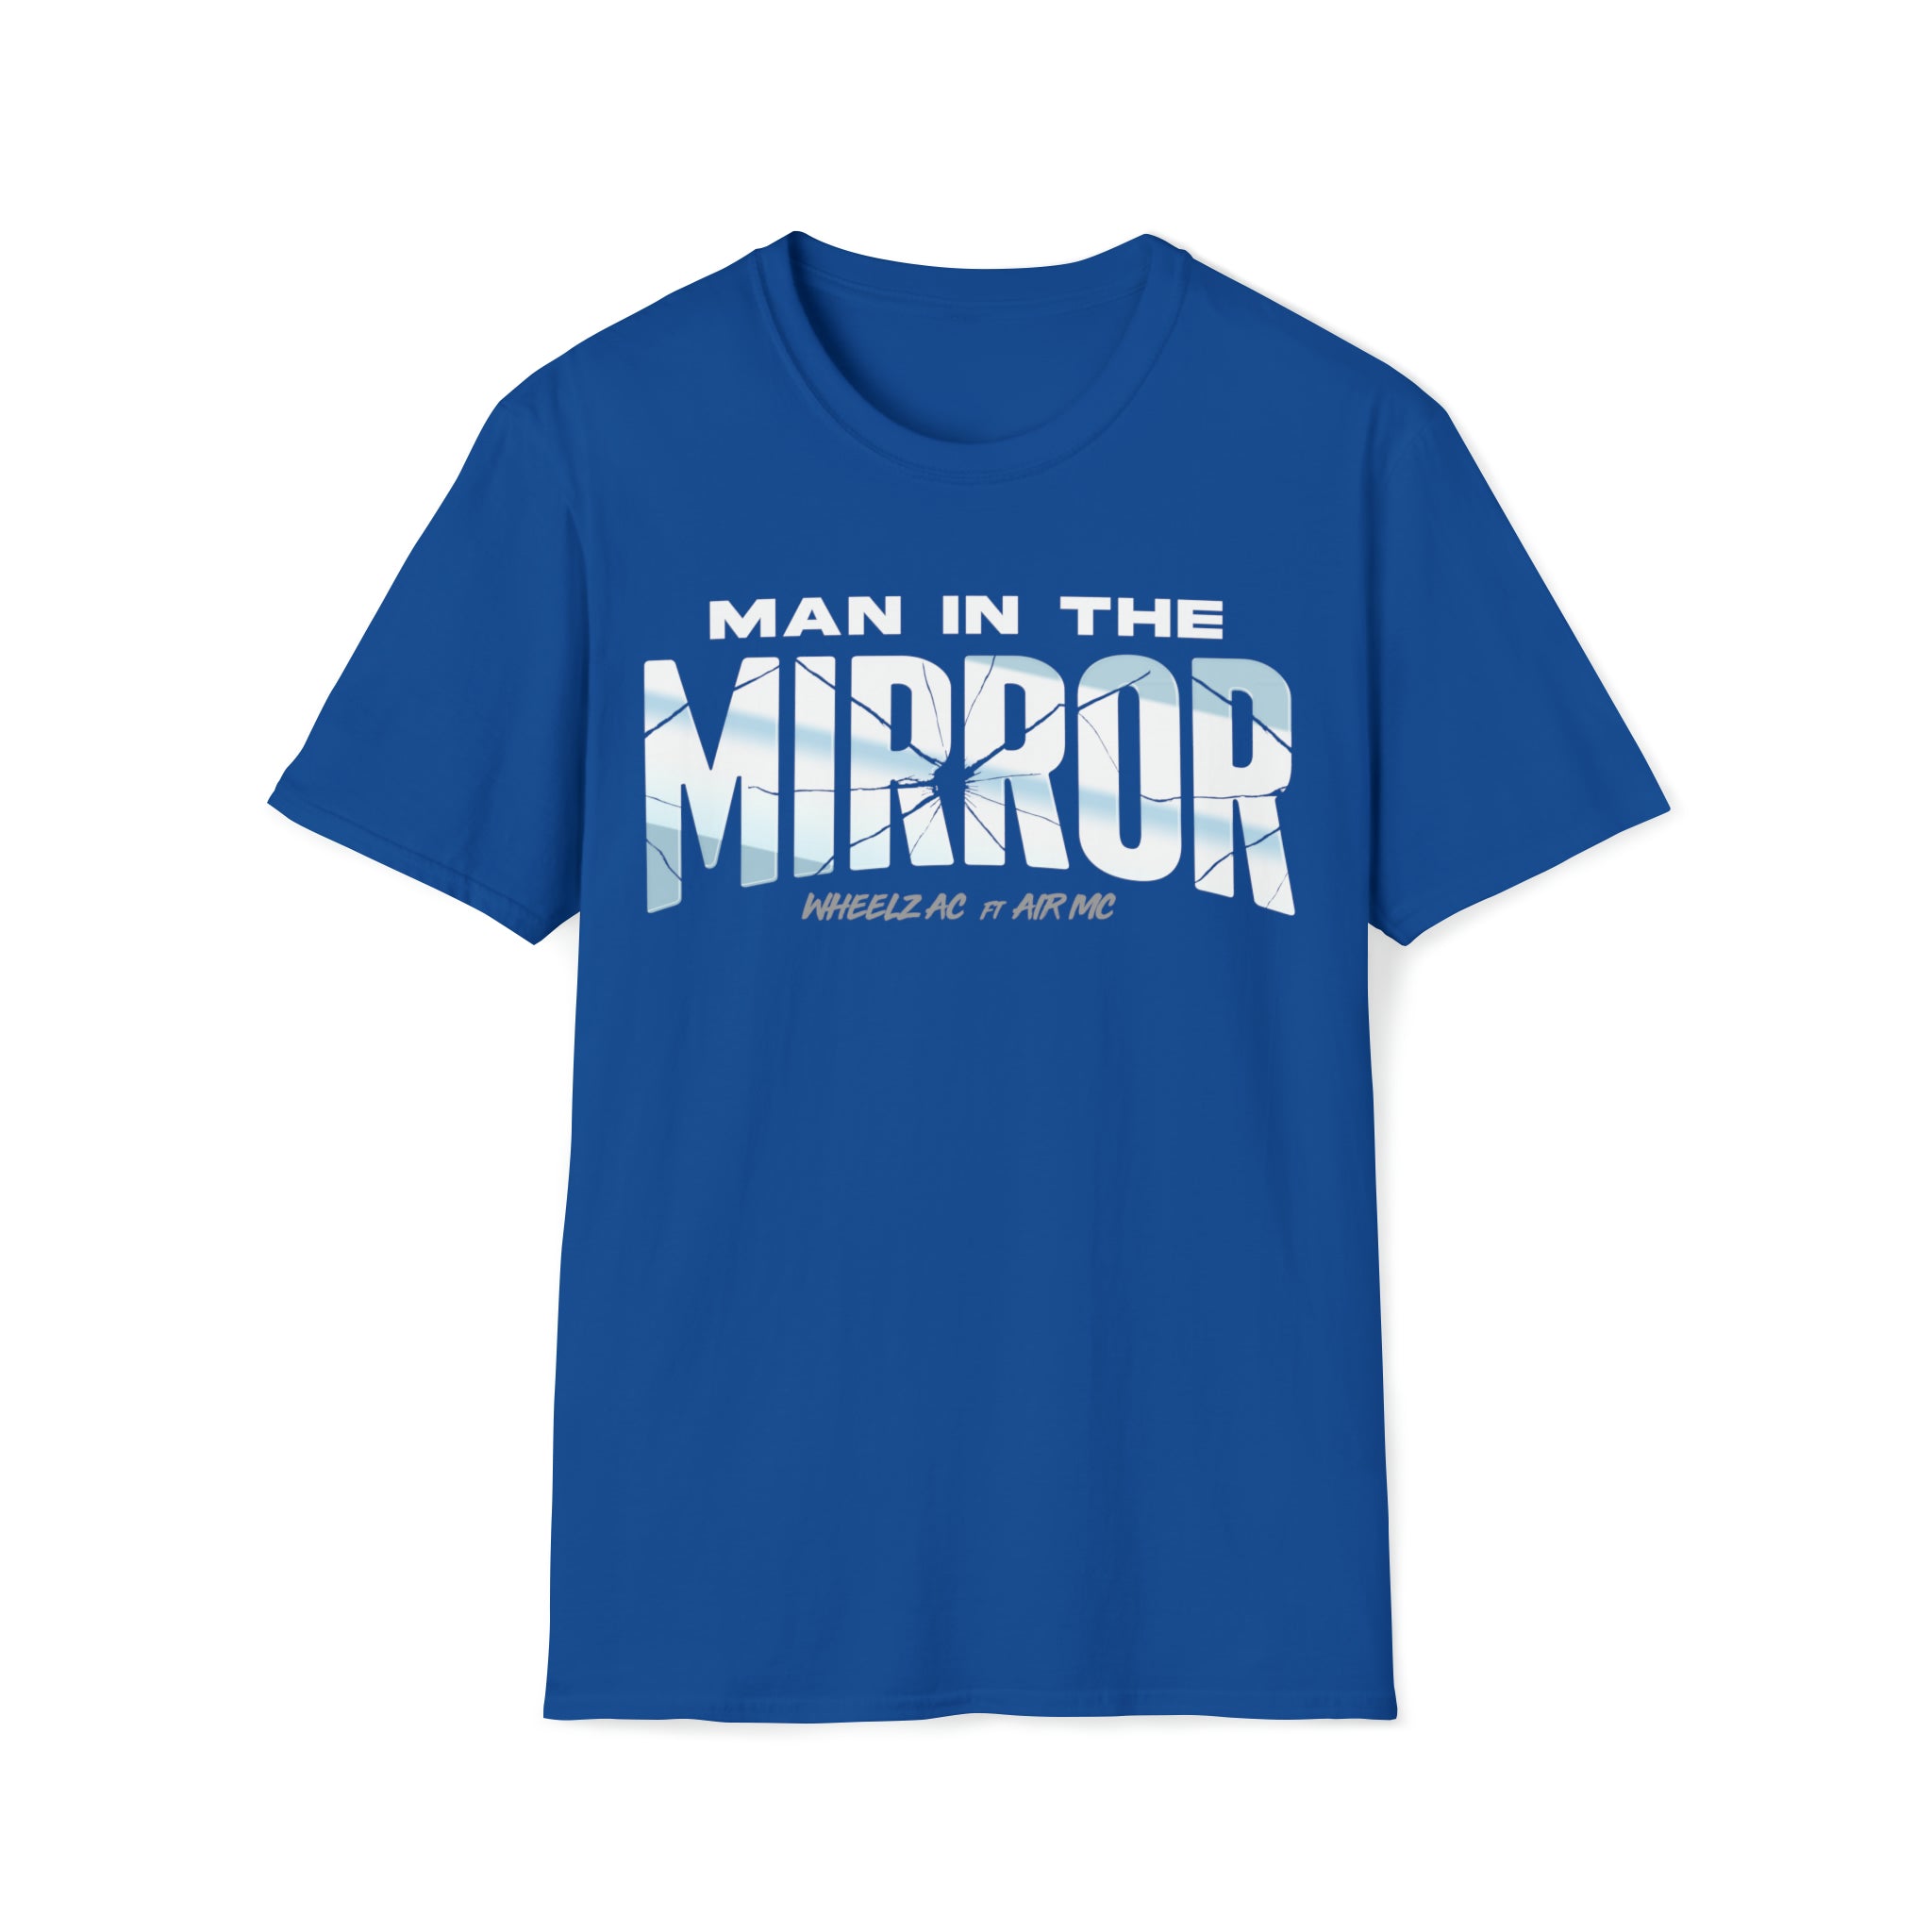 MAN IN THE MIRROR T-Shirt